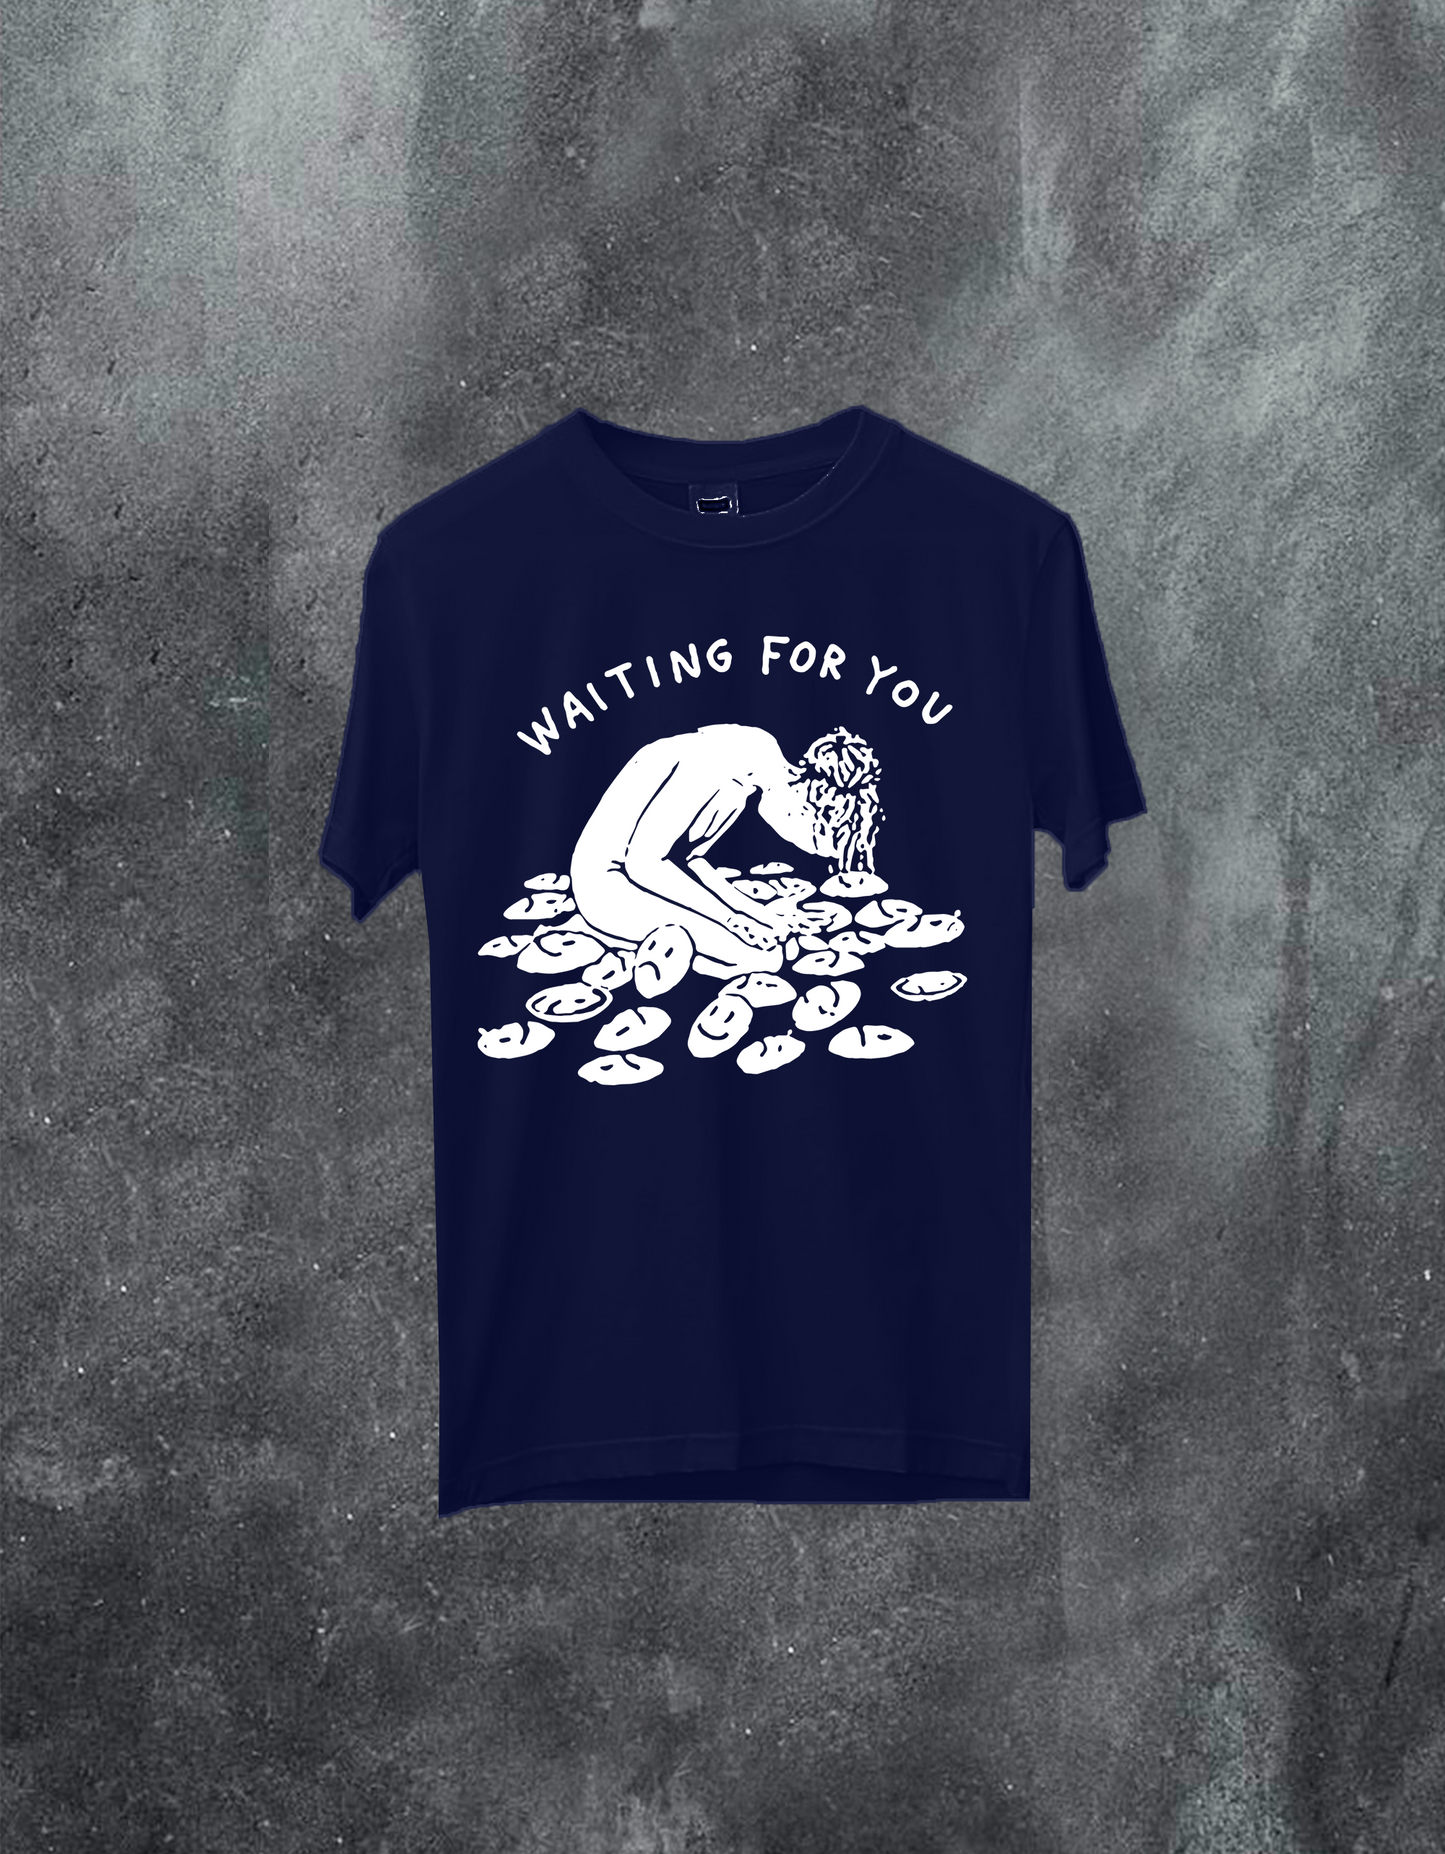 Waiting For You Tee